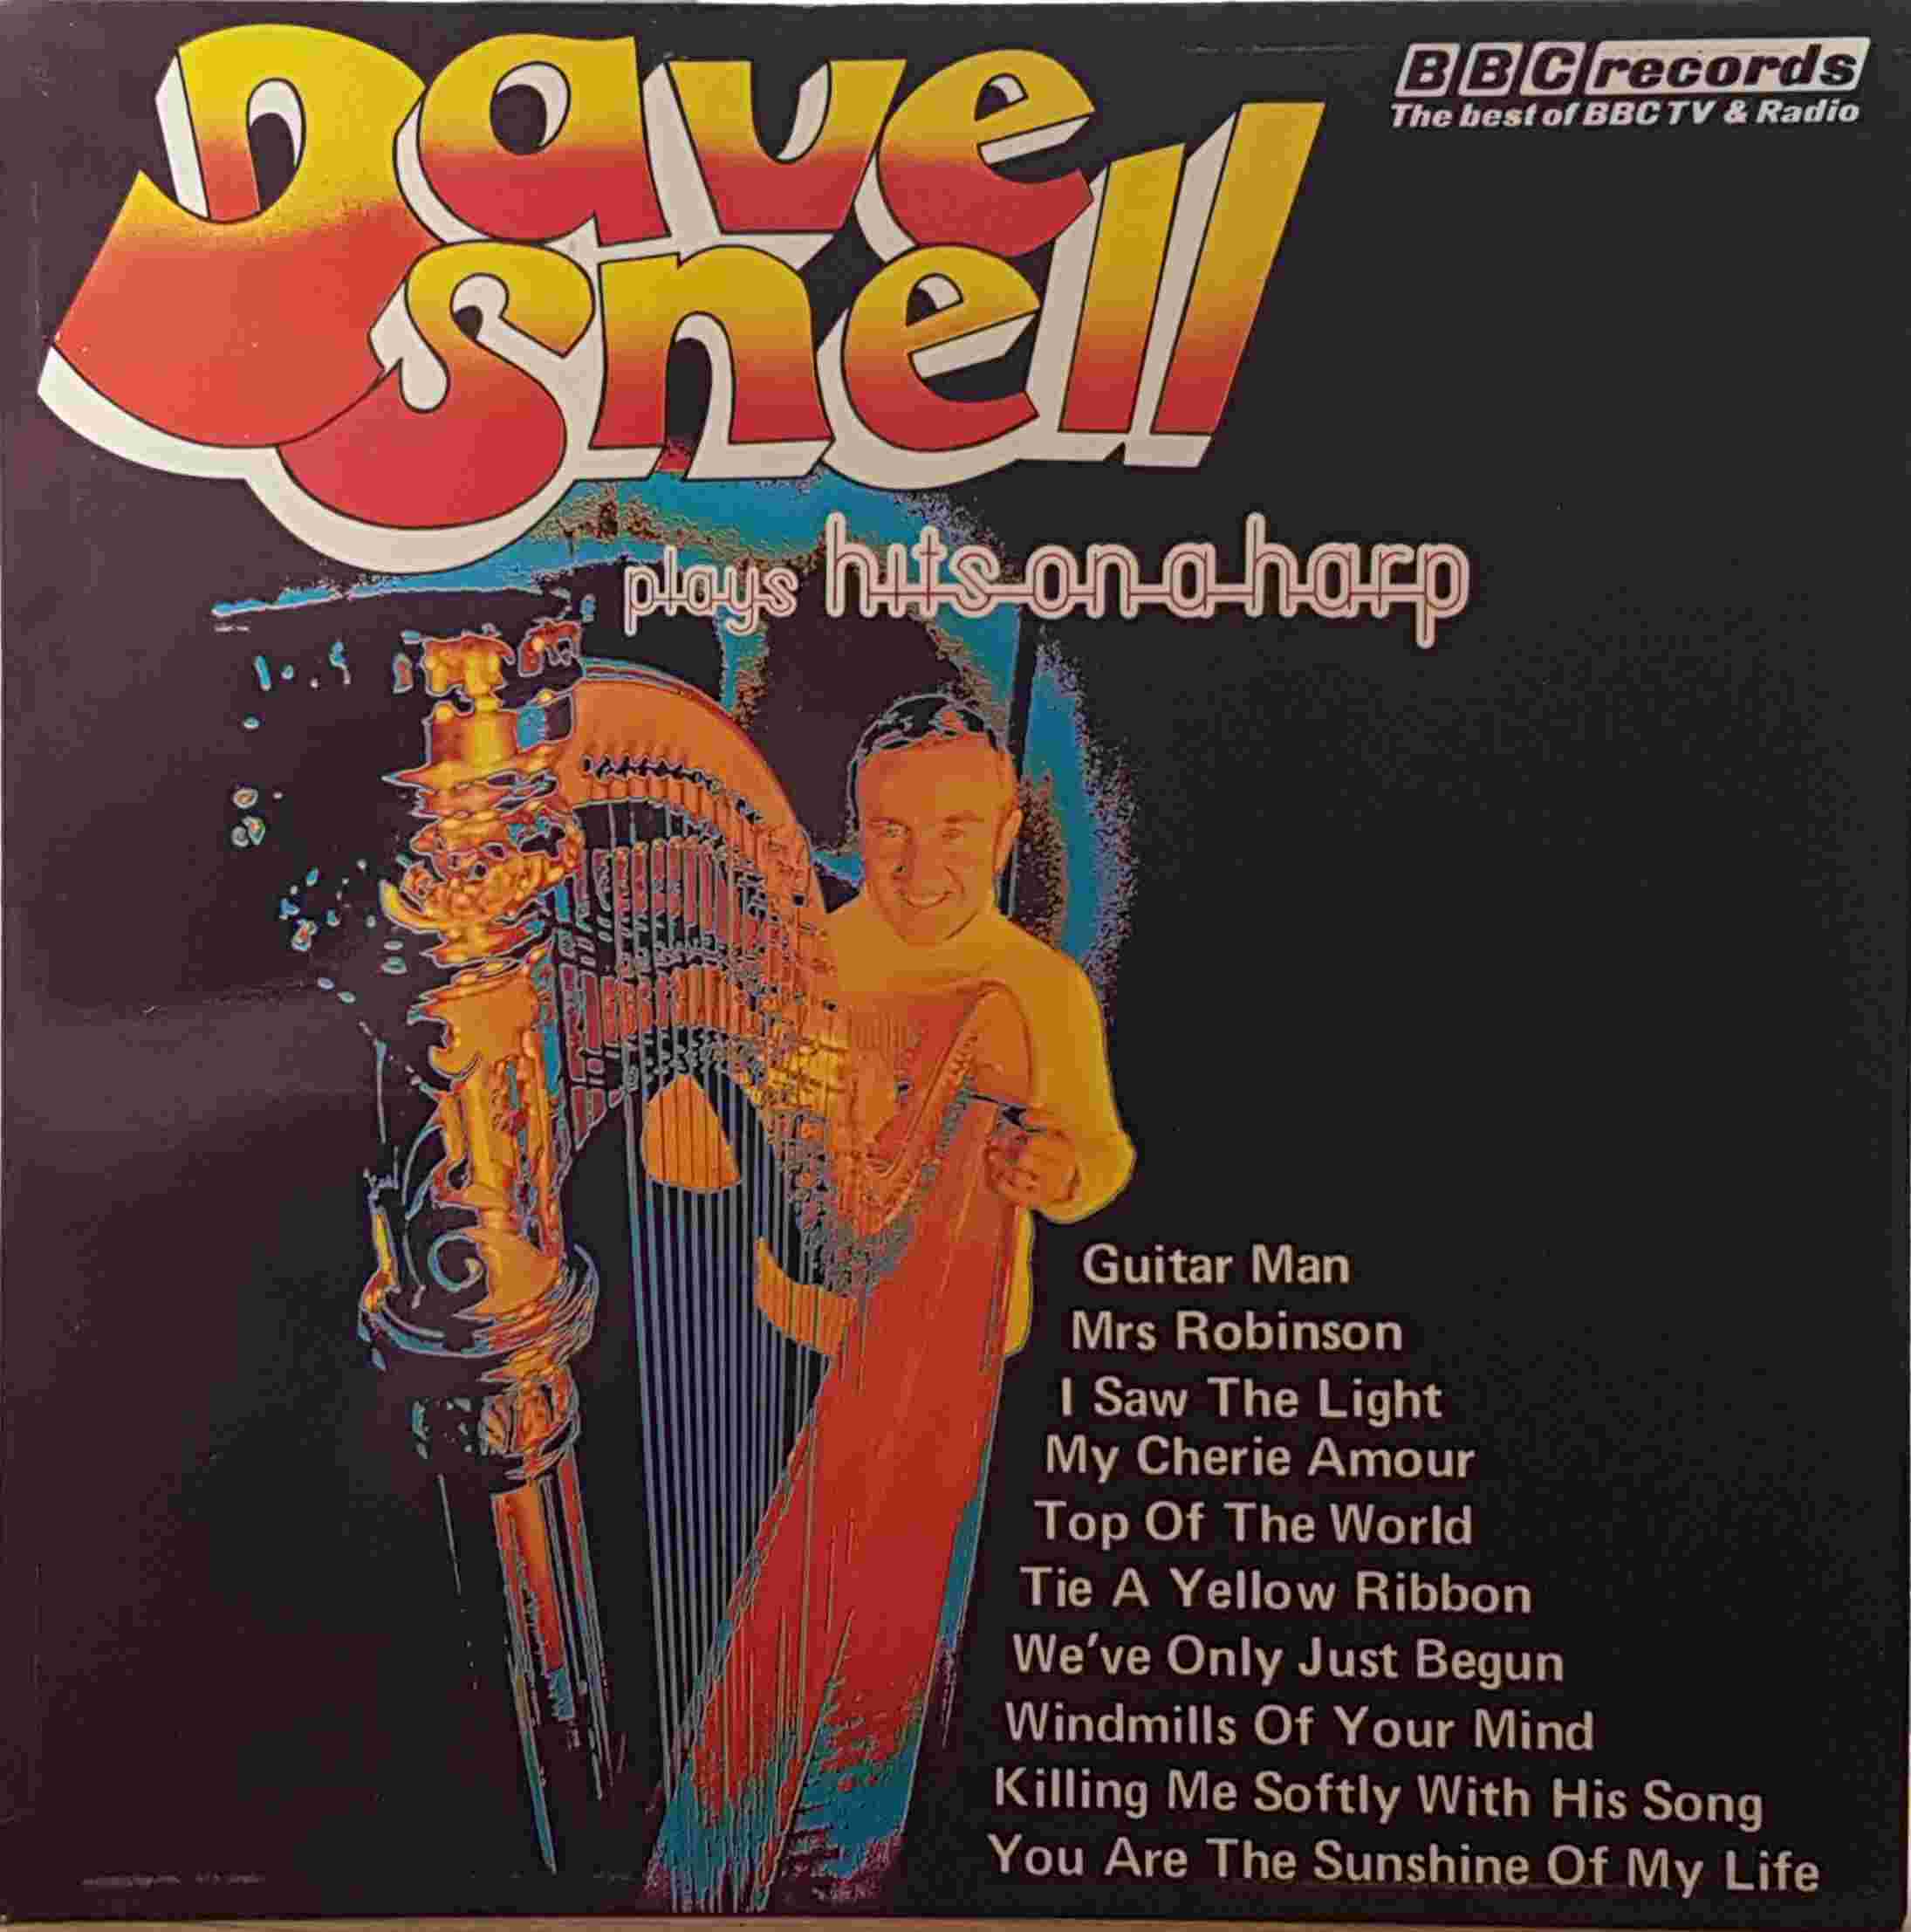 Picture of REC 178 Dave Snell plays hits on the harp by artist Dave Snell from the BBC albums - Records and Tapes library